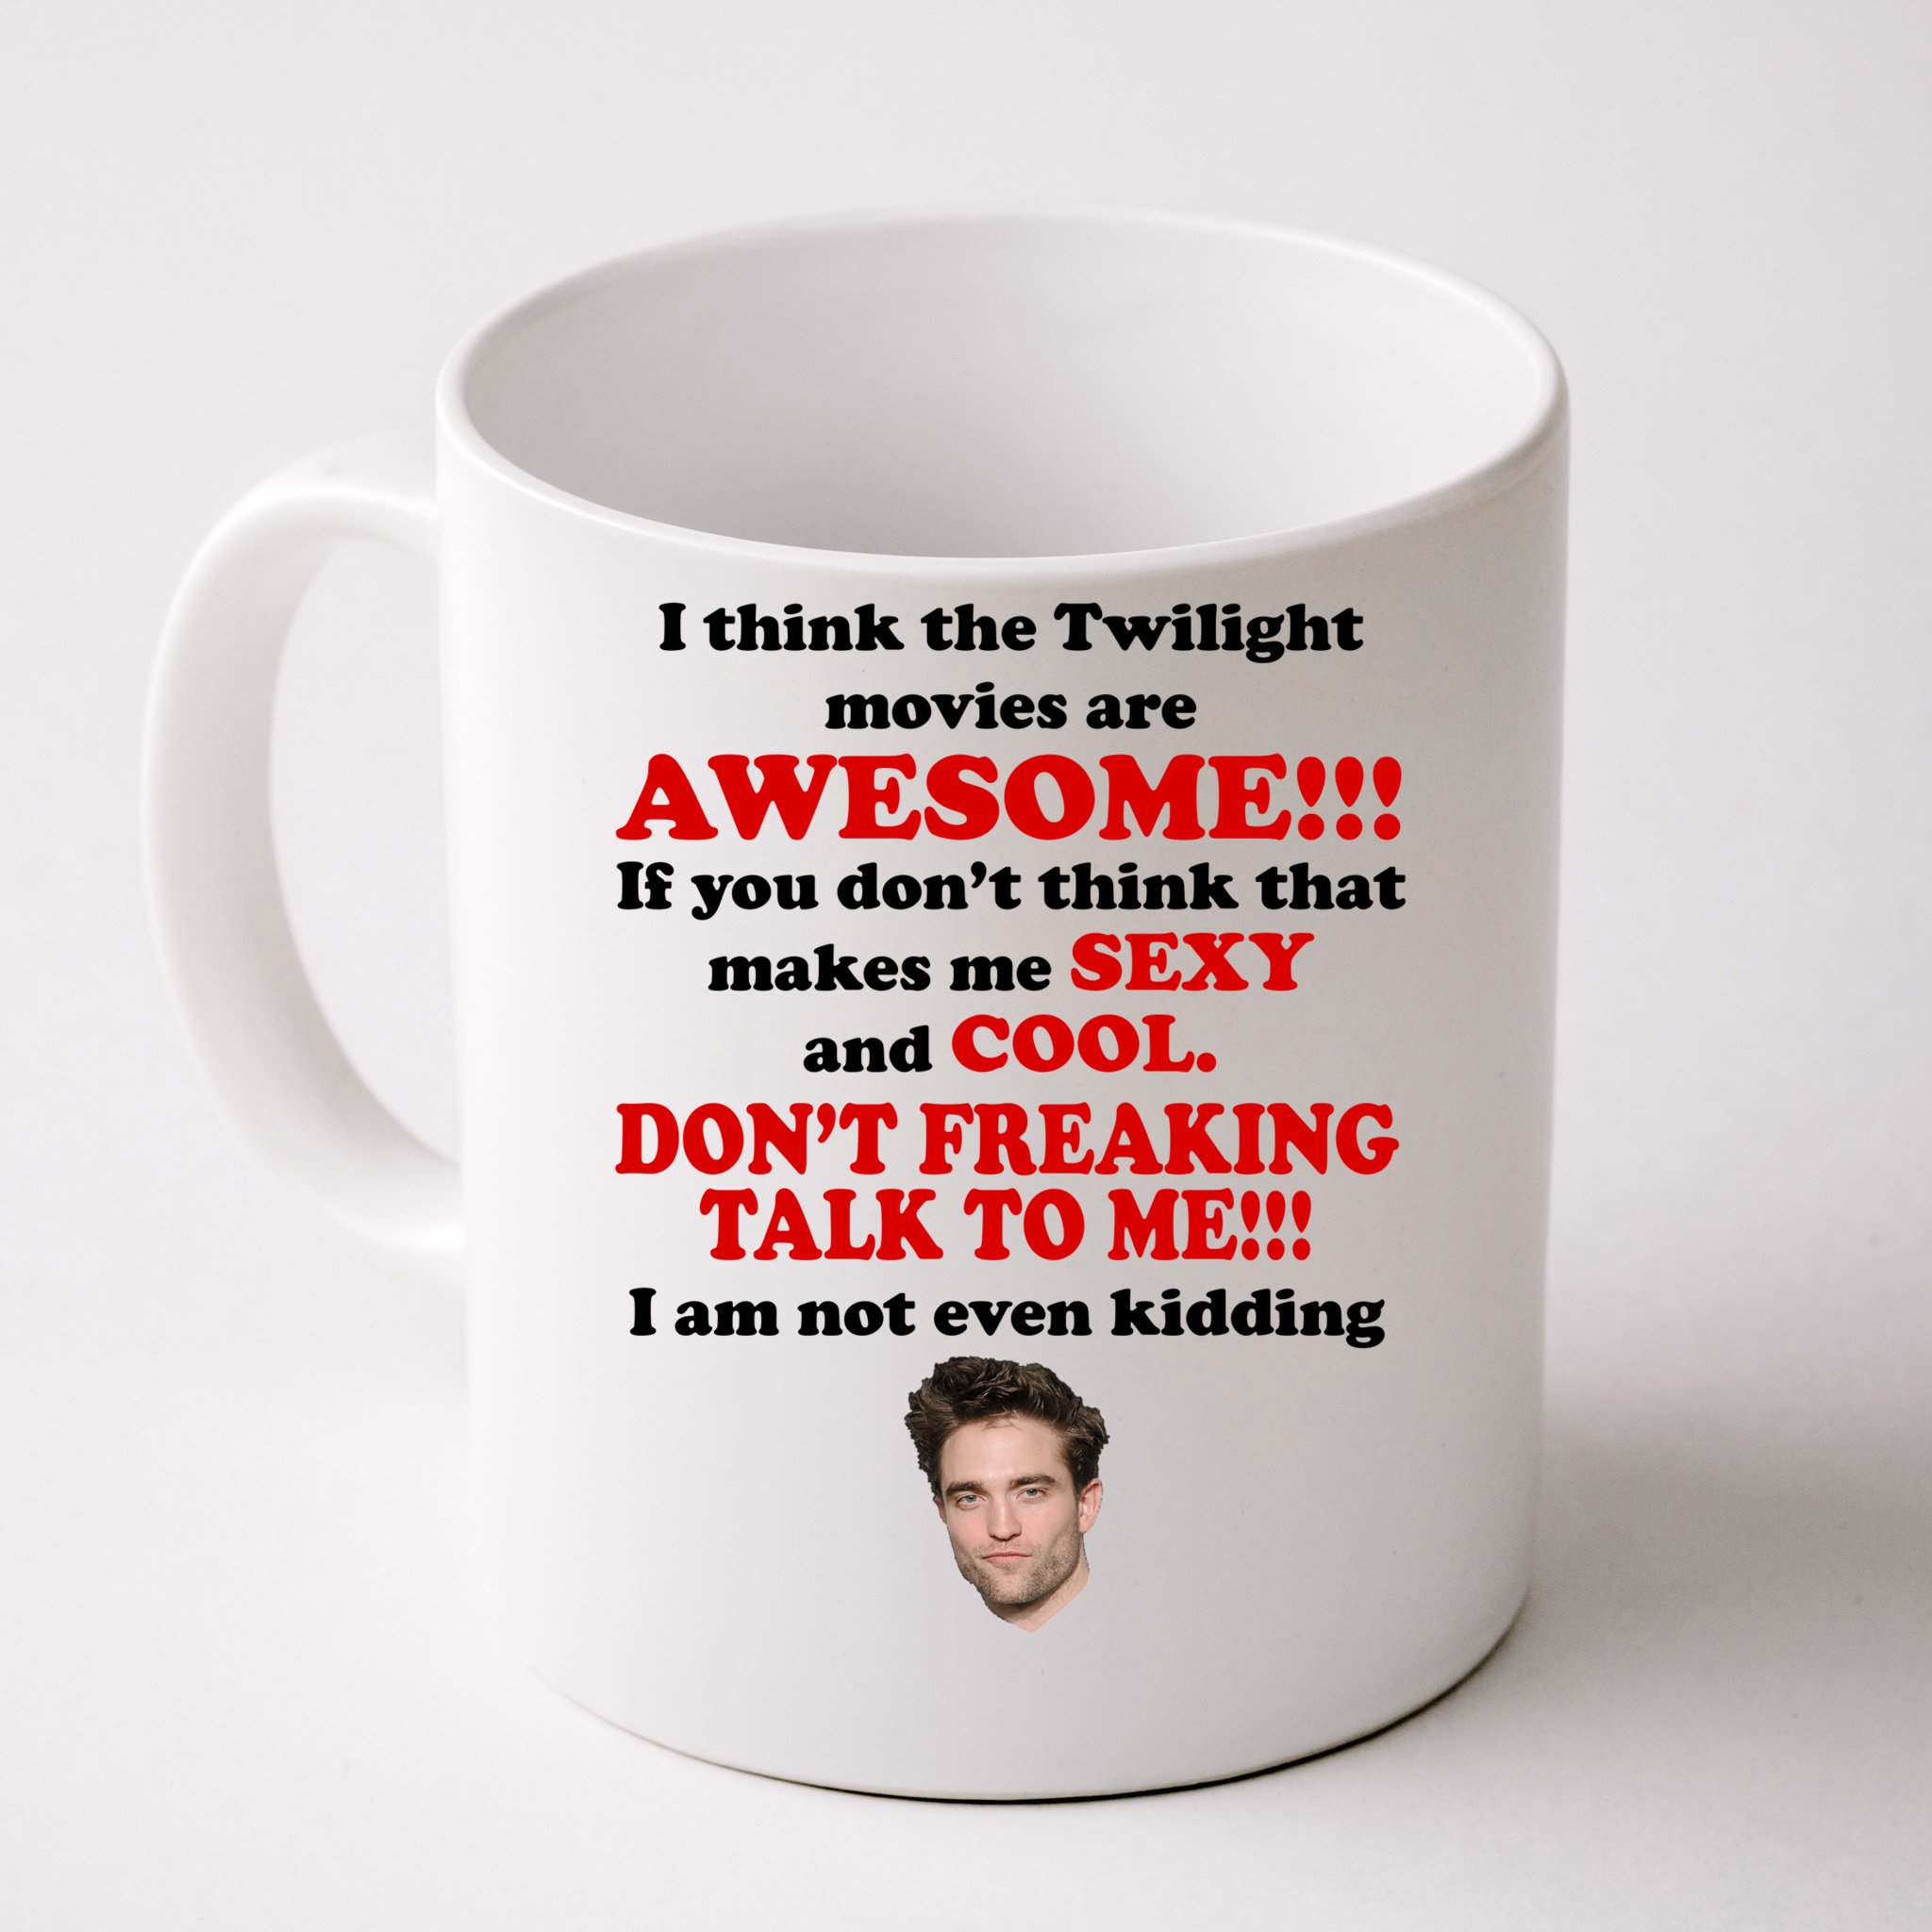 https://images3.teeshirtpalace.com/images/productImages/ftm9619053-funny-twilight-movies-quote--white-cfm-front.jpg